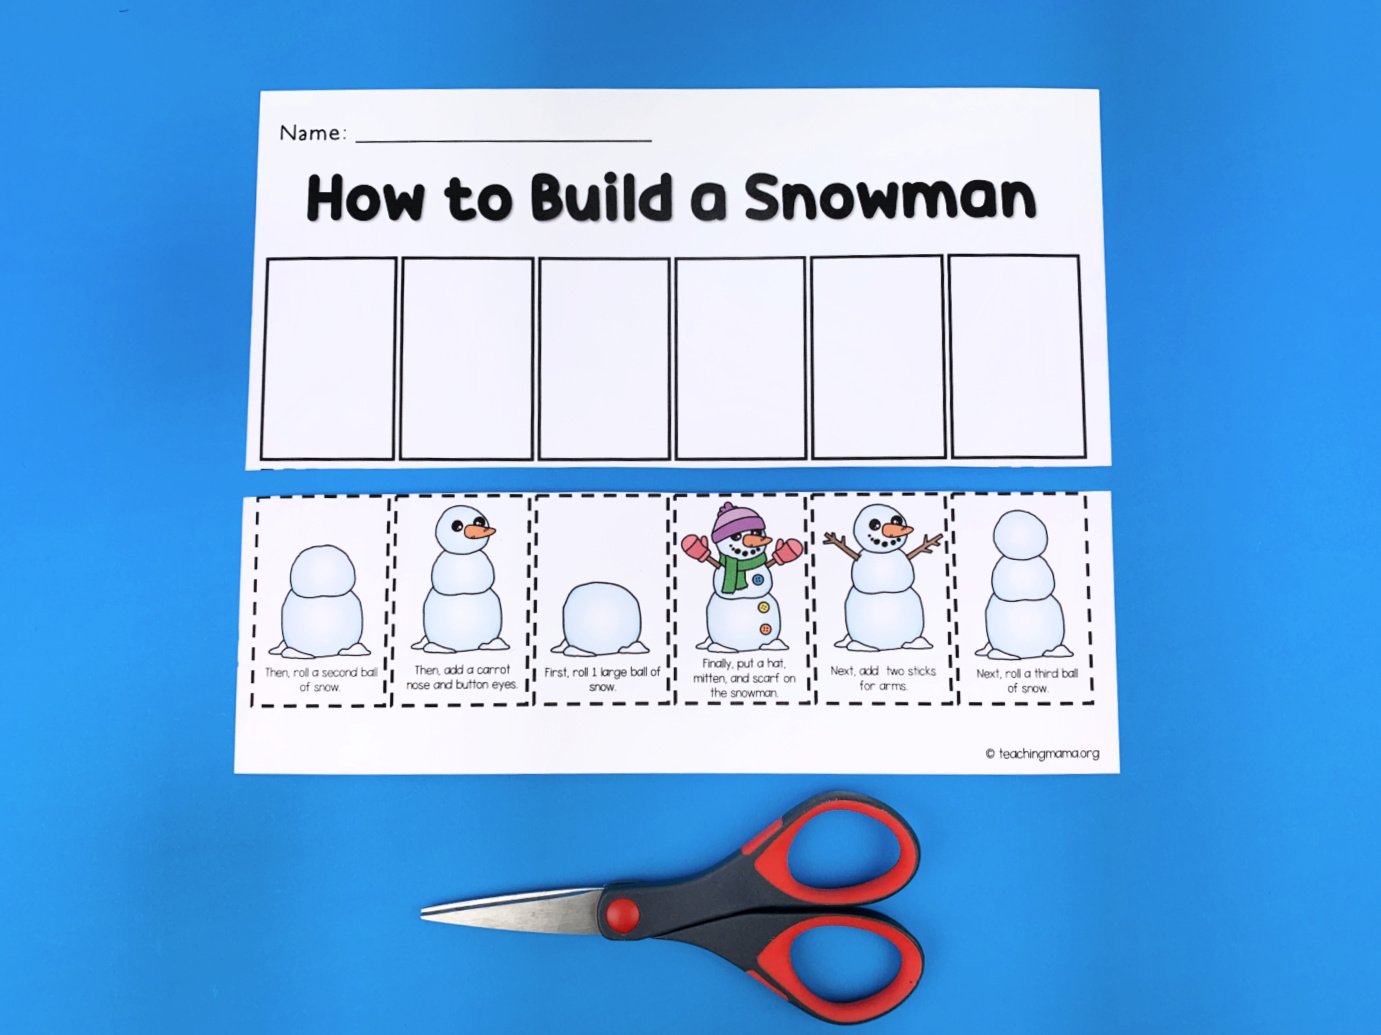 how to build a snowman cut out steps